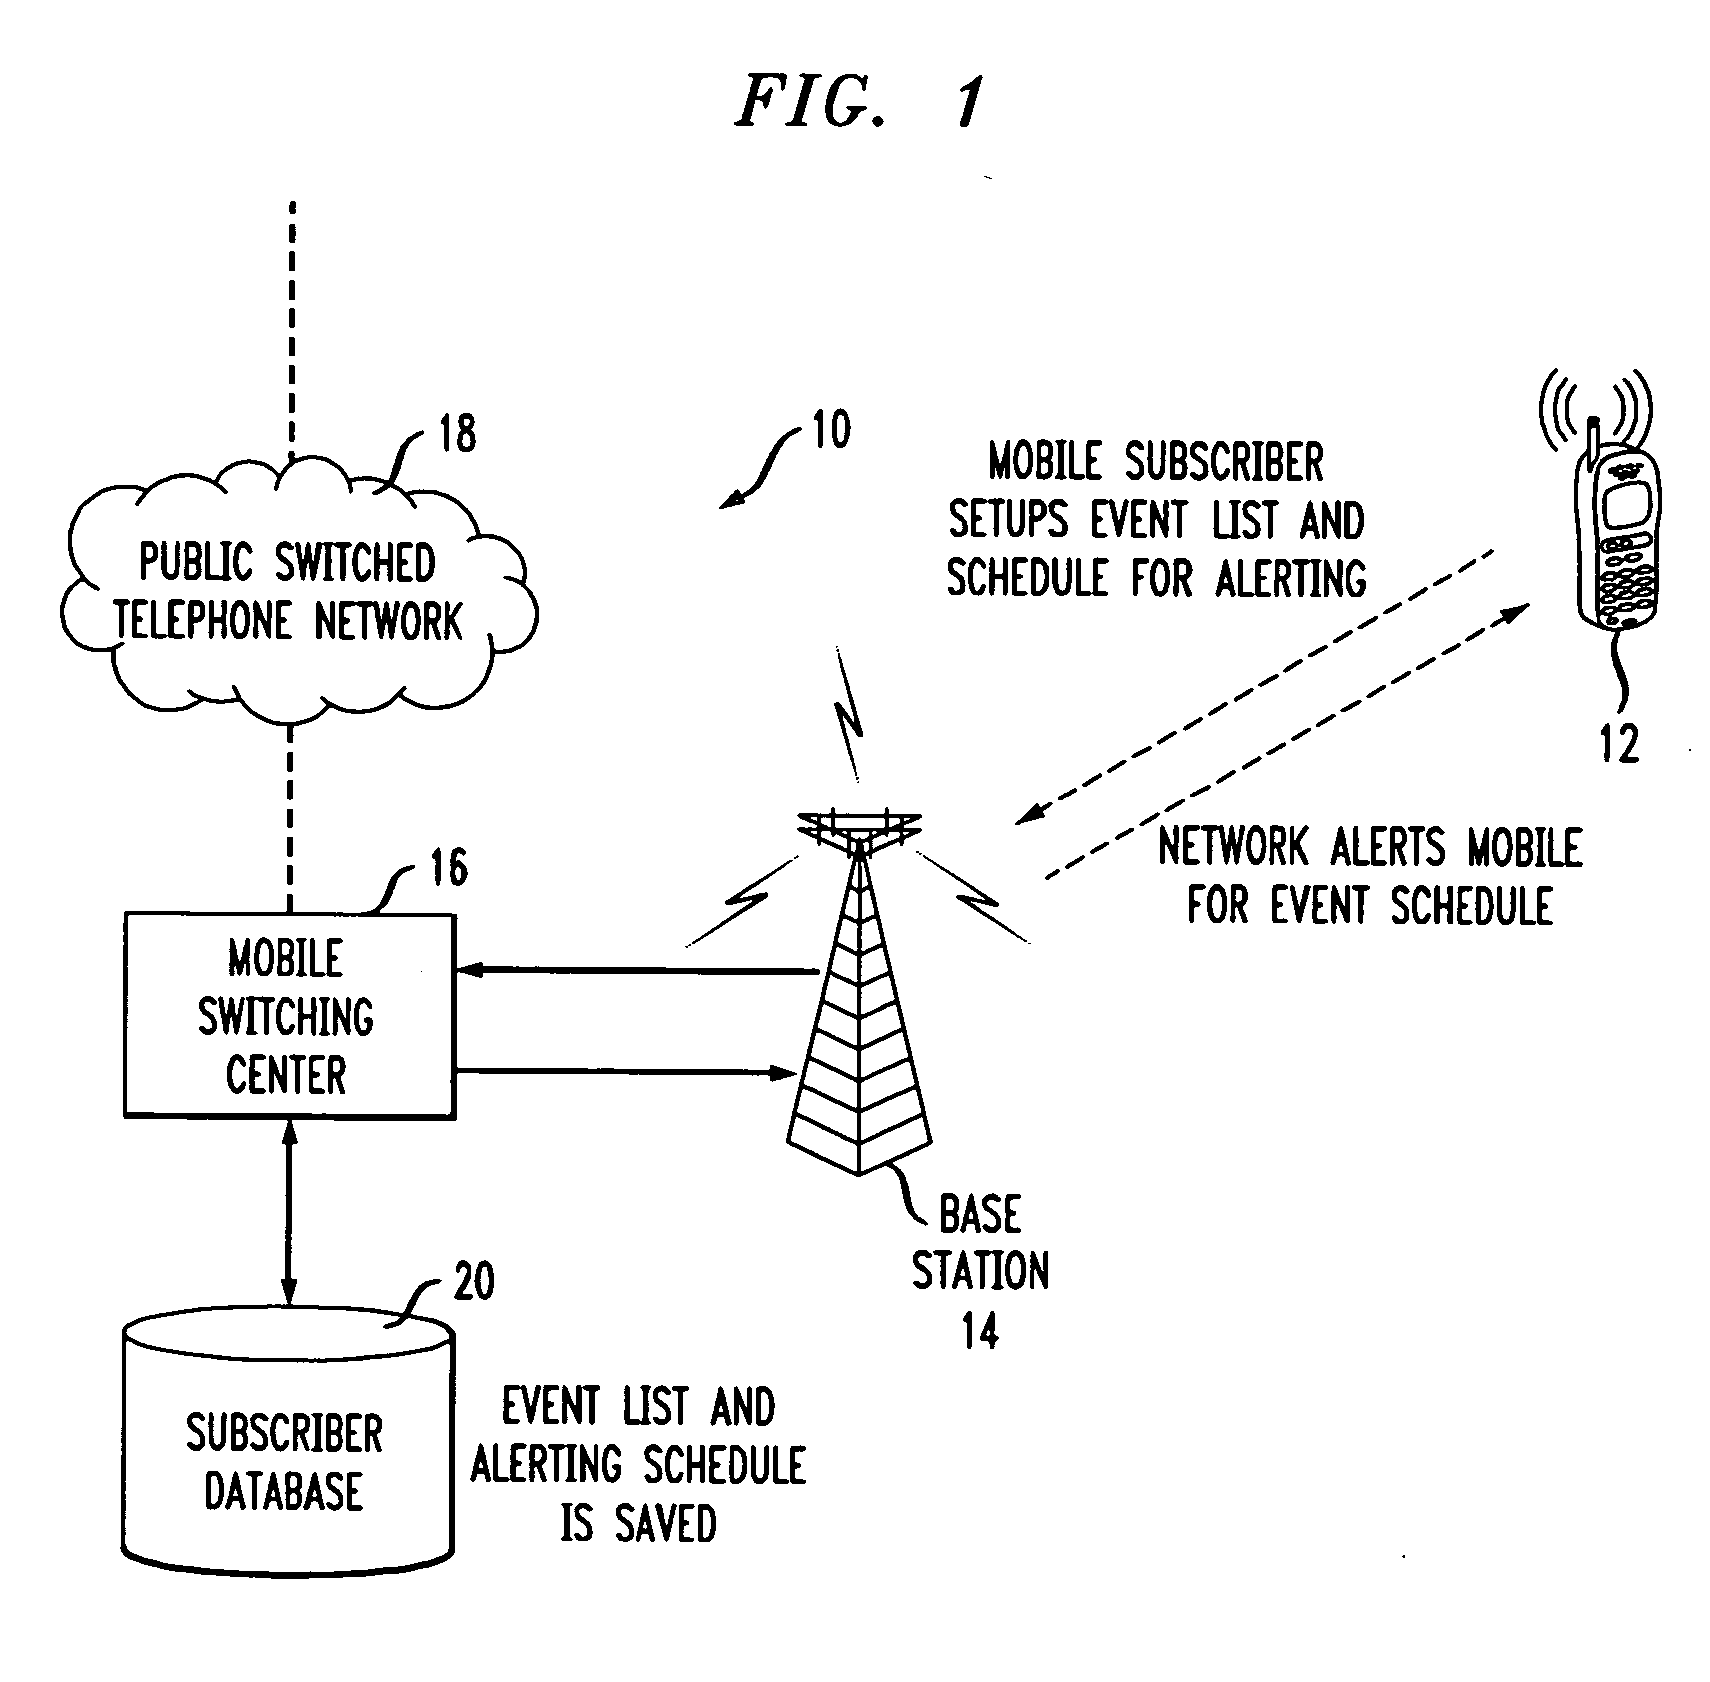 Method and apparatus for network initiated event reminder alerting